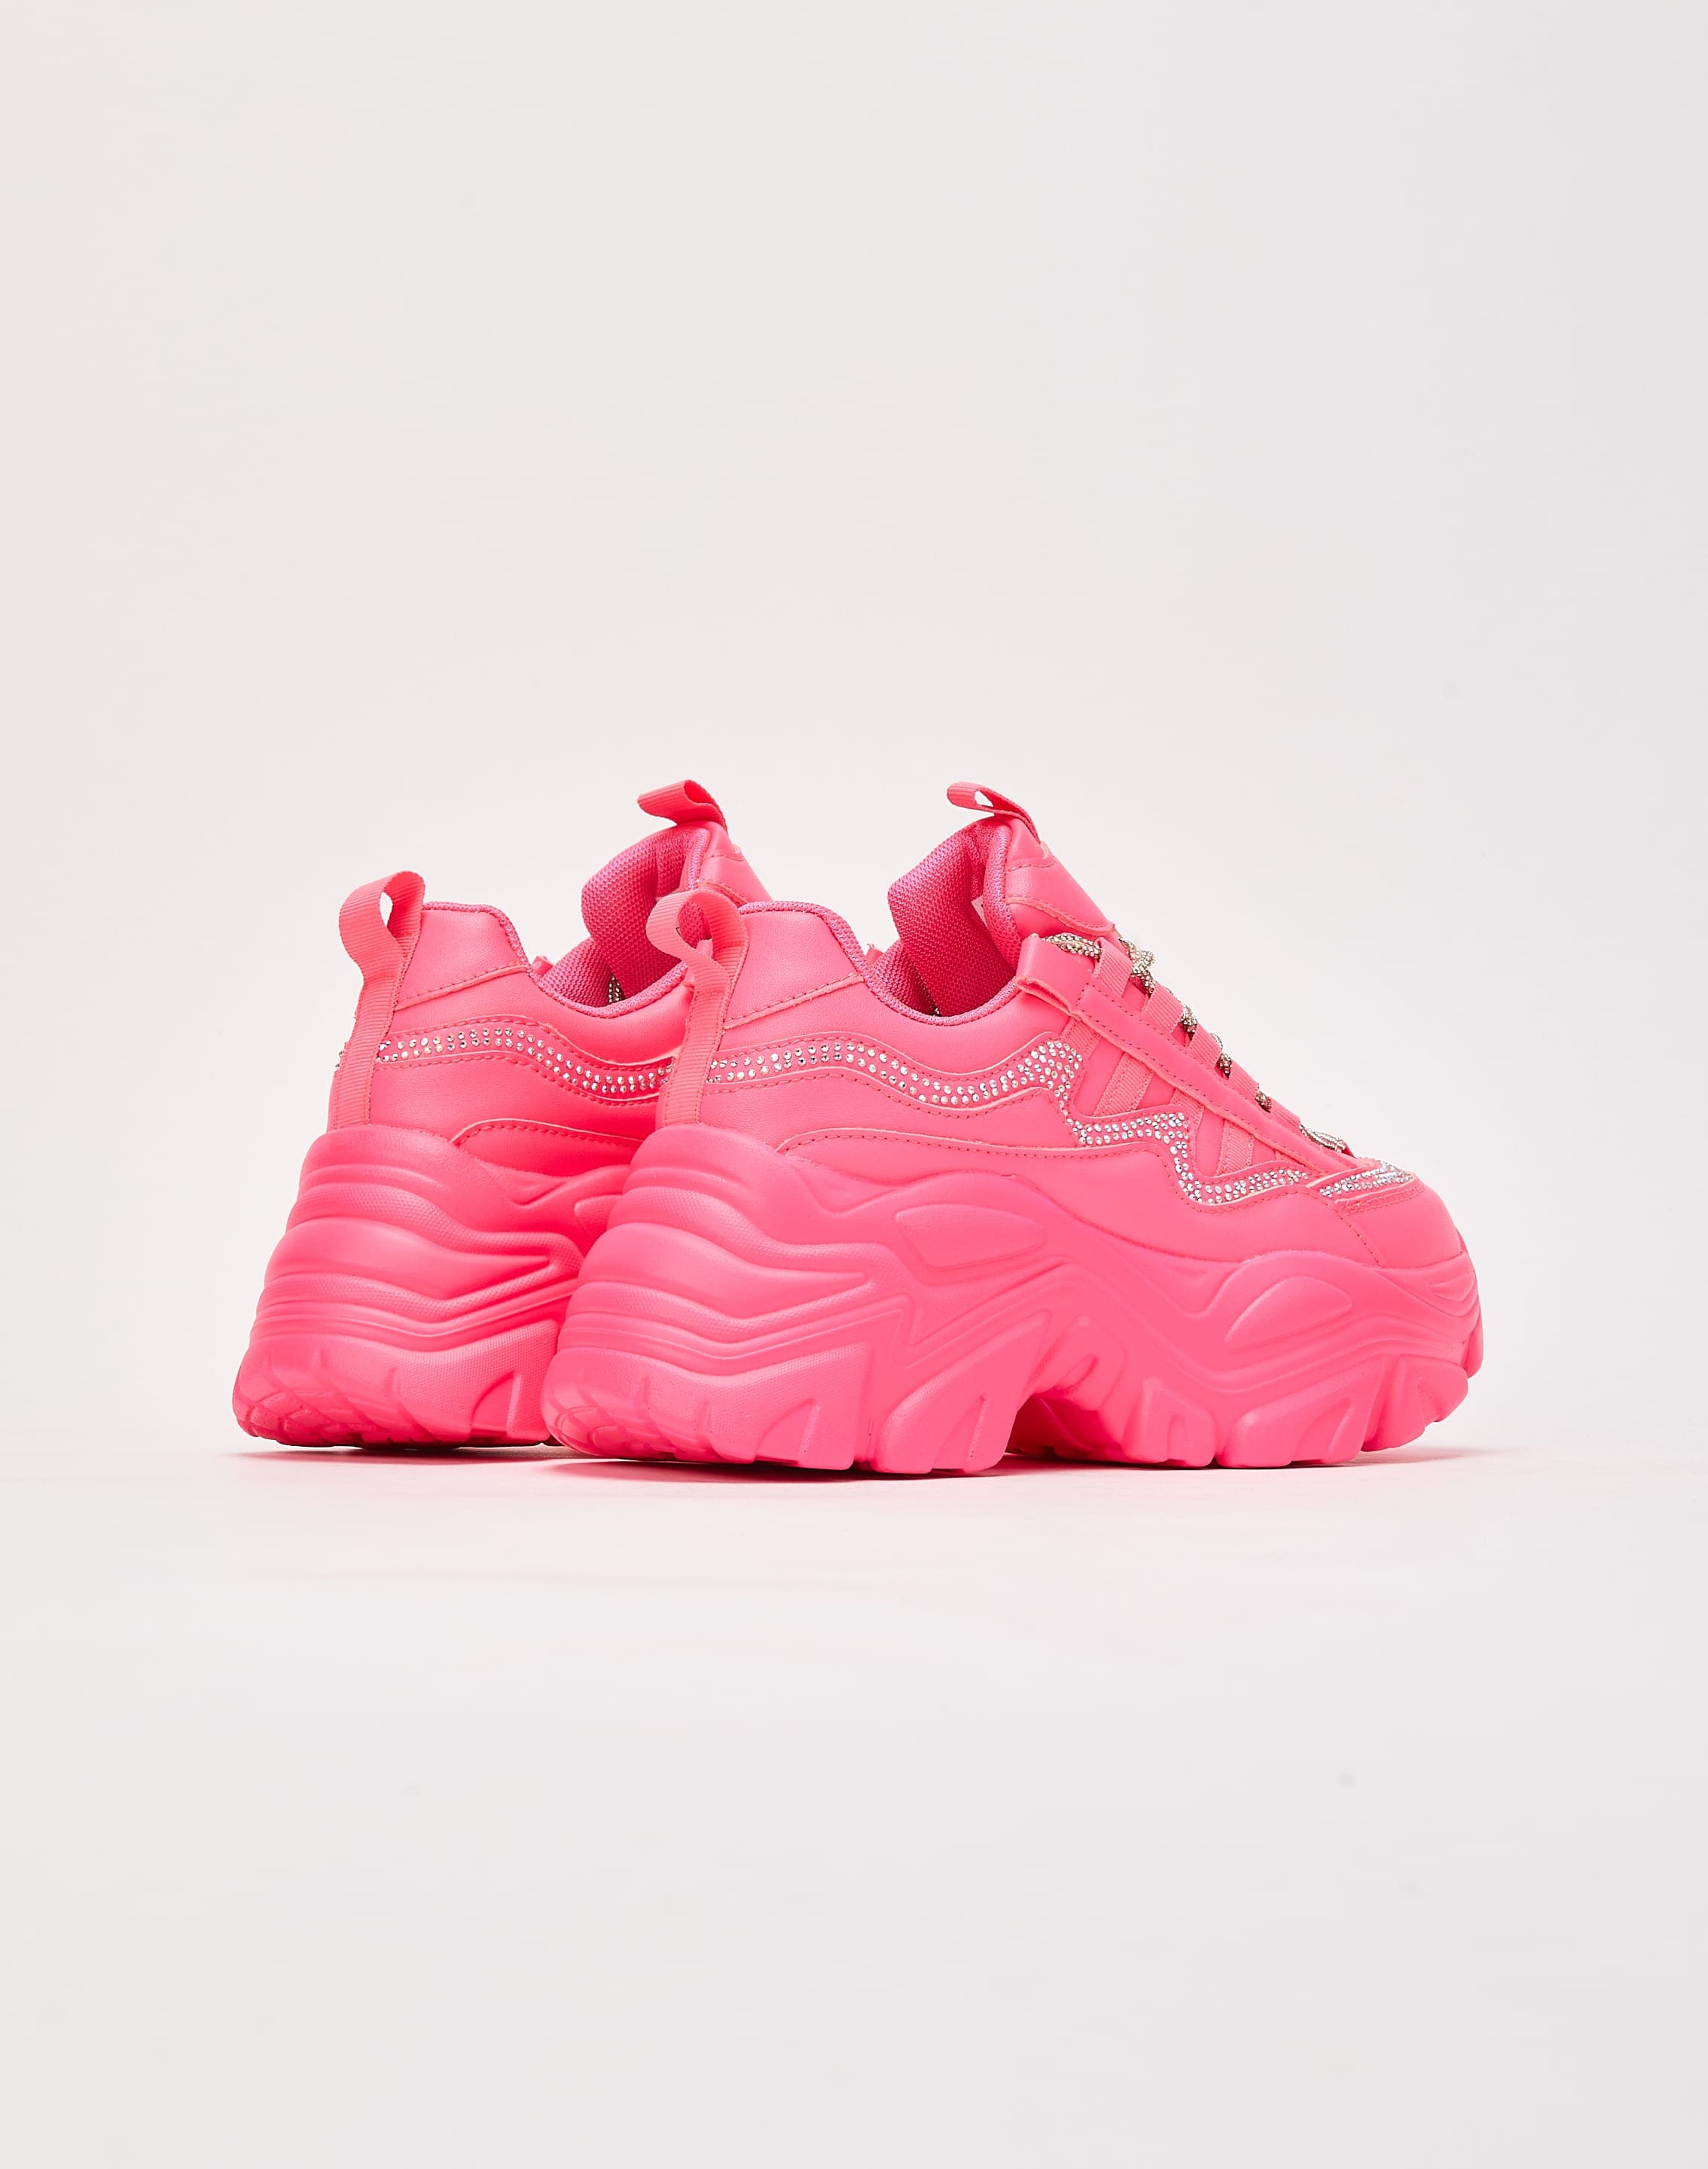 Berness Hot Pink Athletic Sneakers